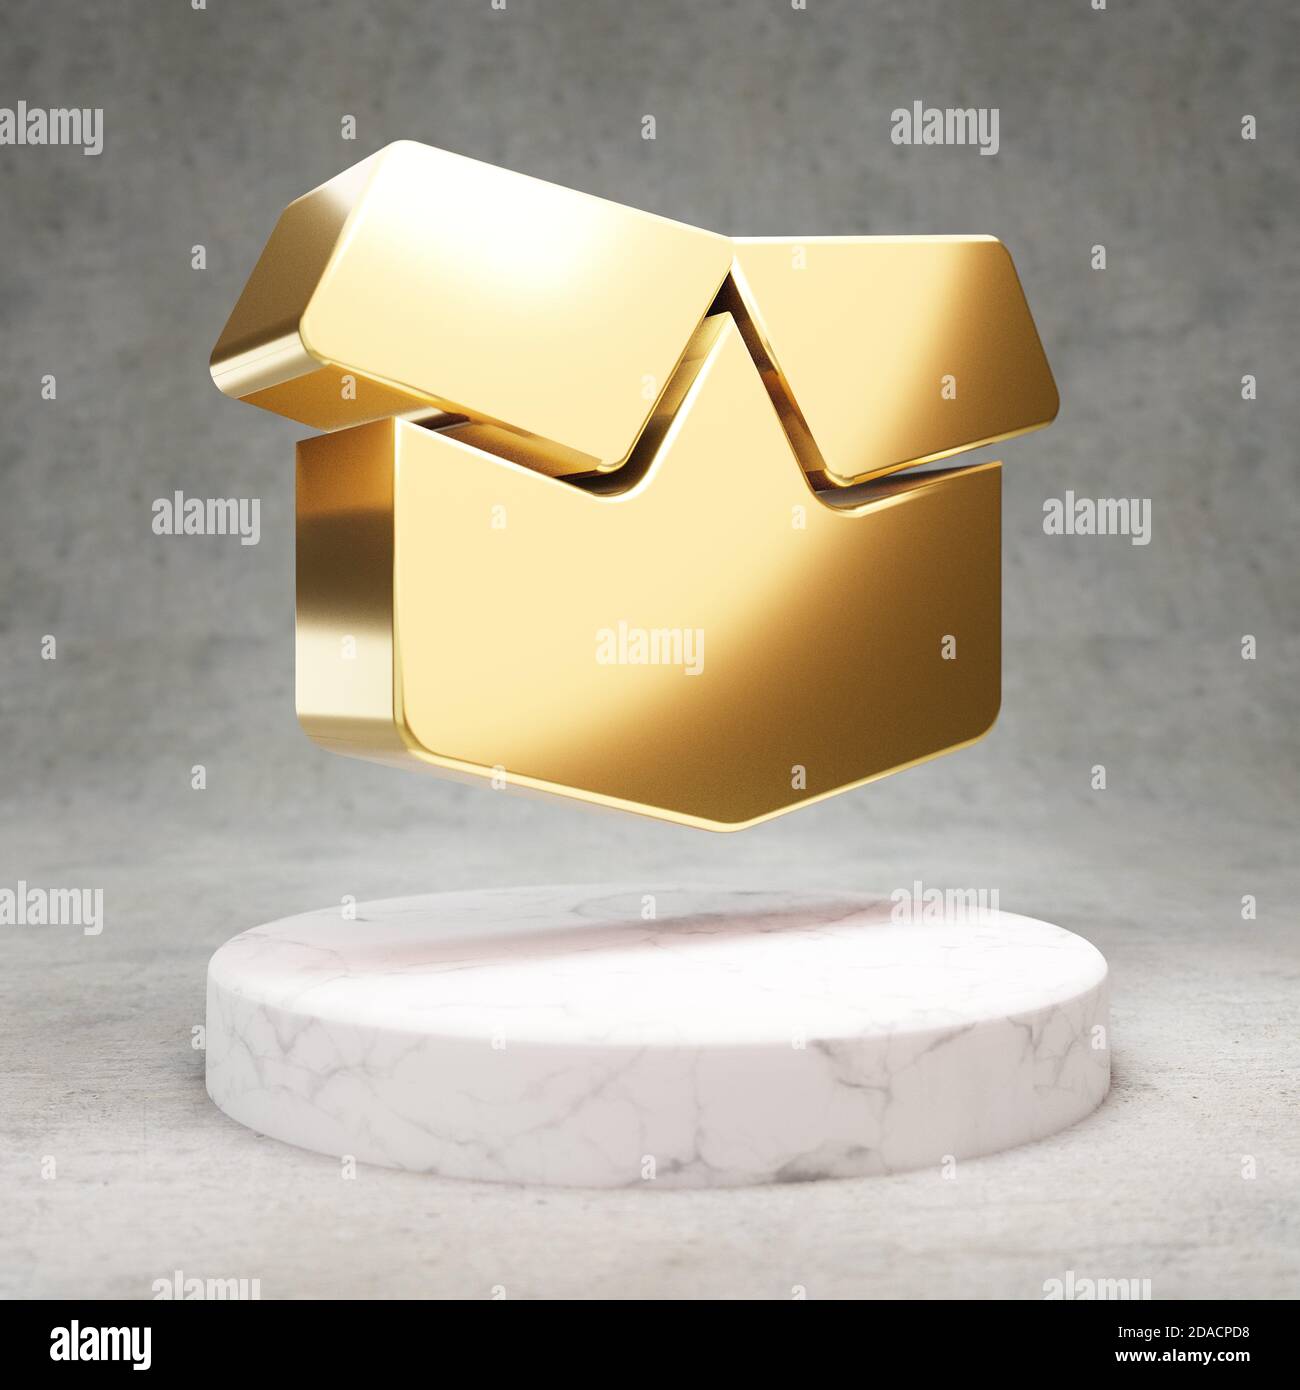 Open Box icon. Gold glossy Open Box symbol on white marble podium. Modern icon for website, social media, presentation, design template element. 3D render. Stock Photo